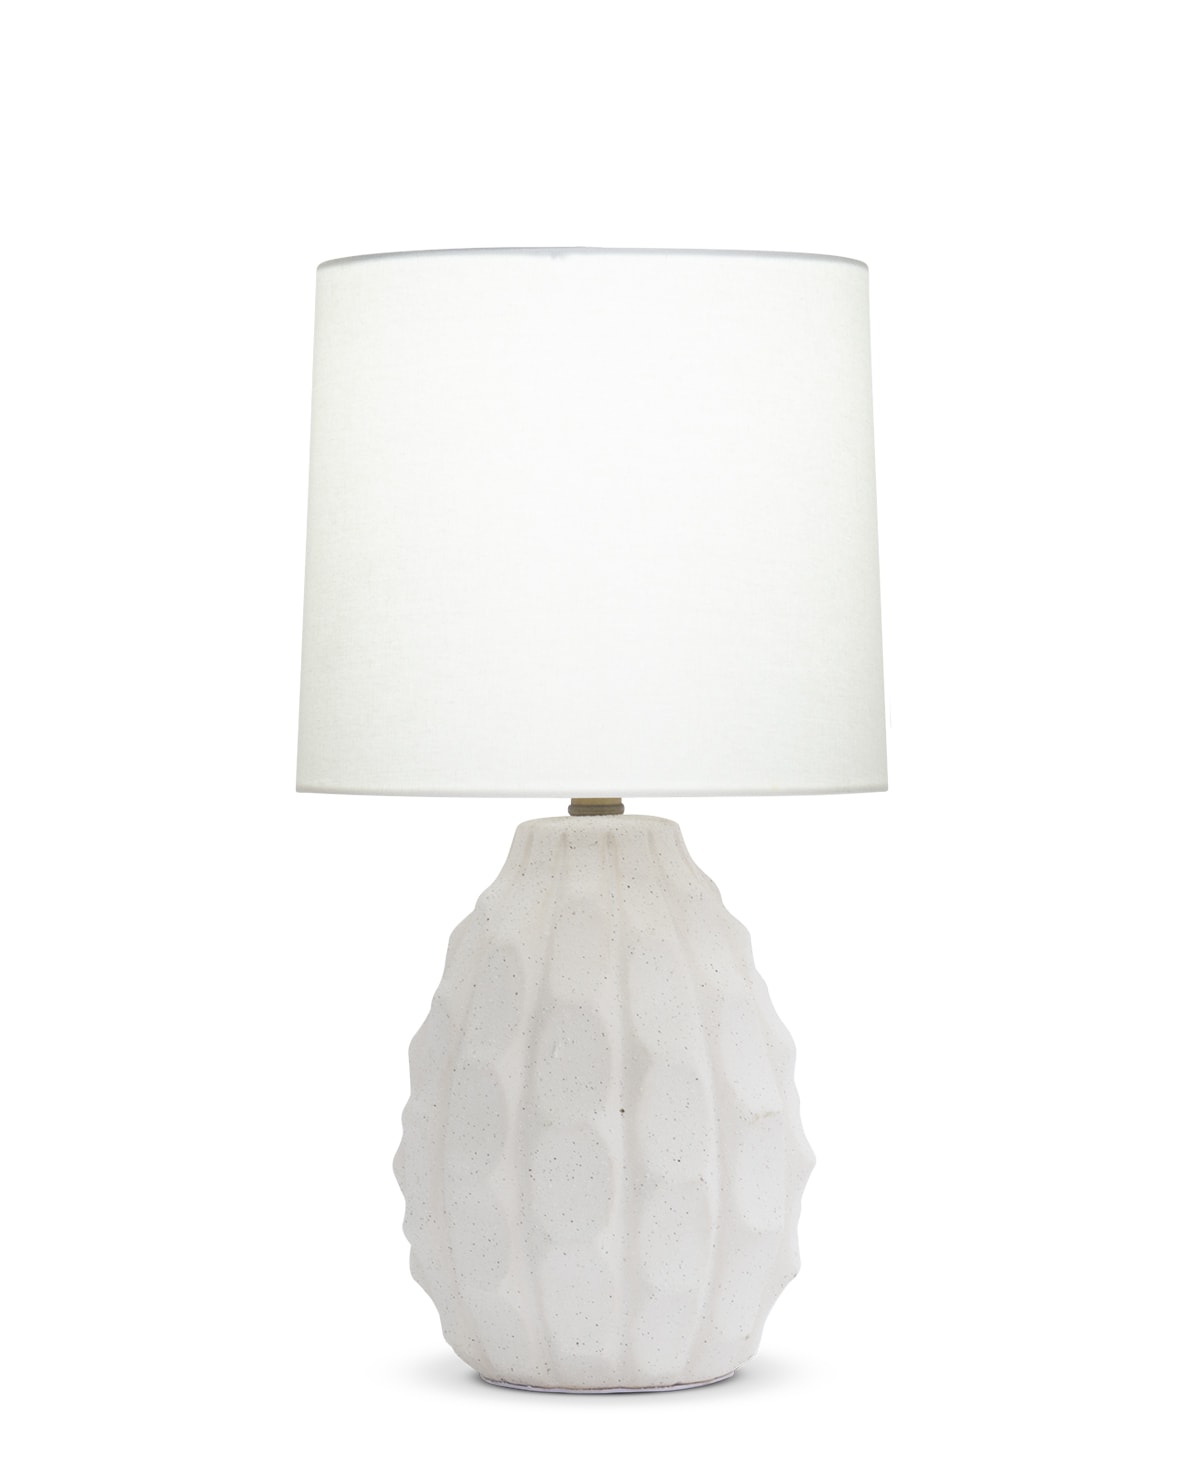 FlowDecor Smith Table Lamp in ceramic with off-white textured finish and off-white linen tapered drum shade (# 4575)